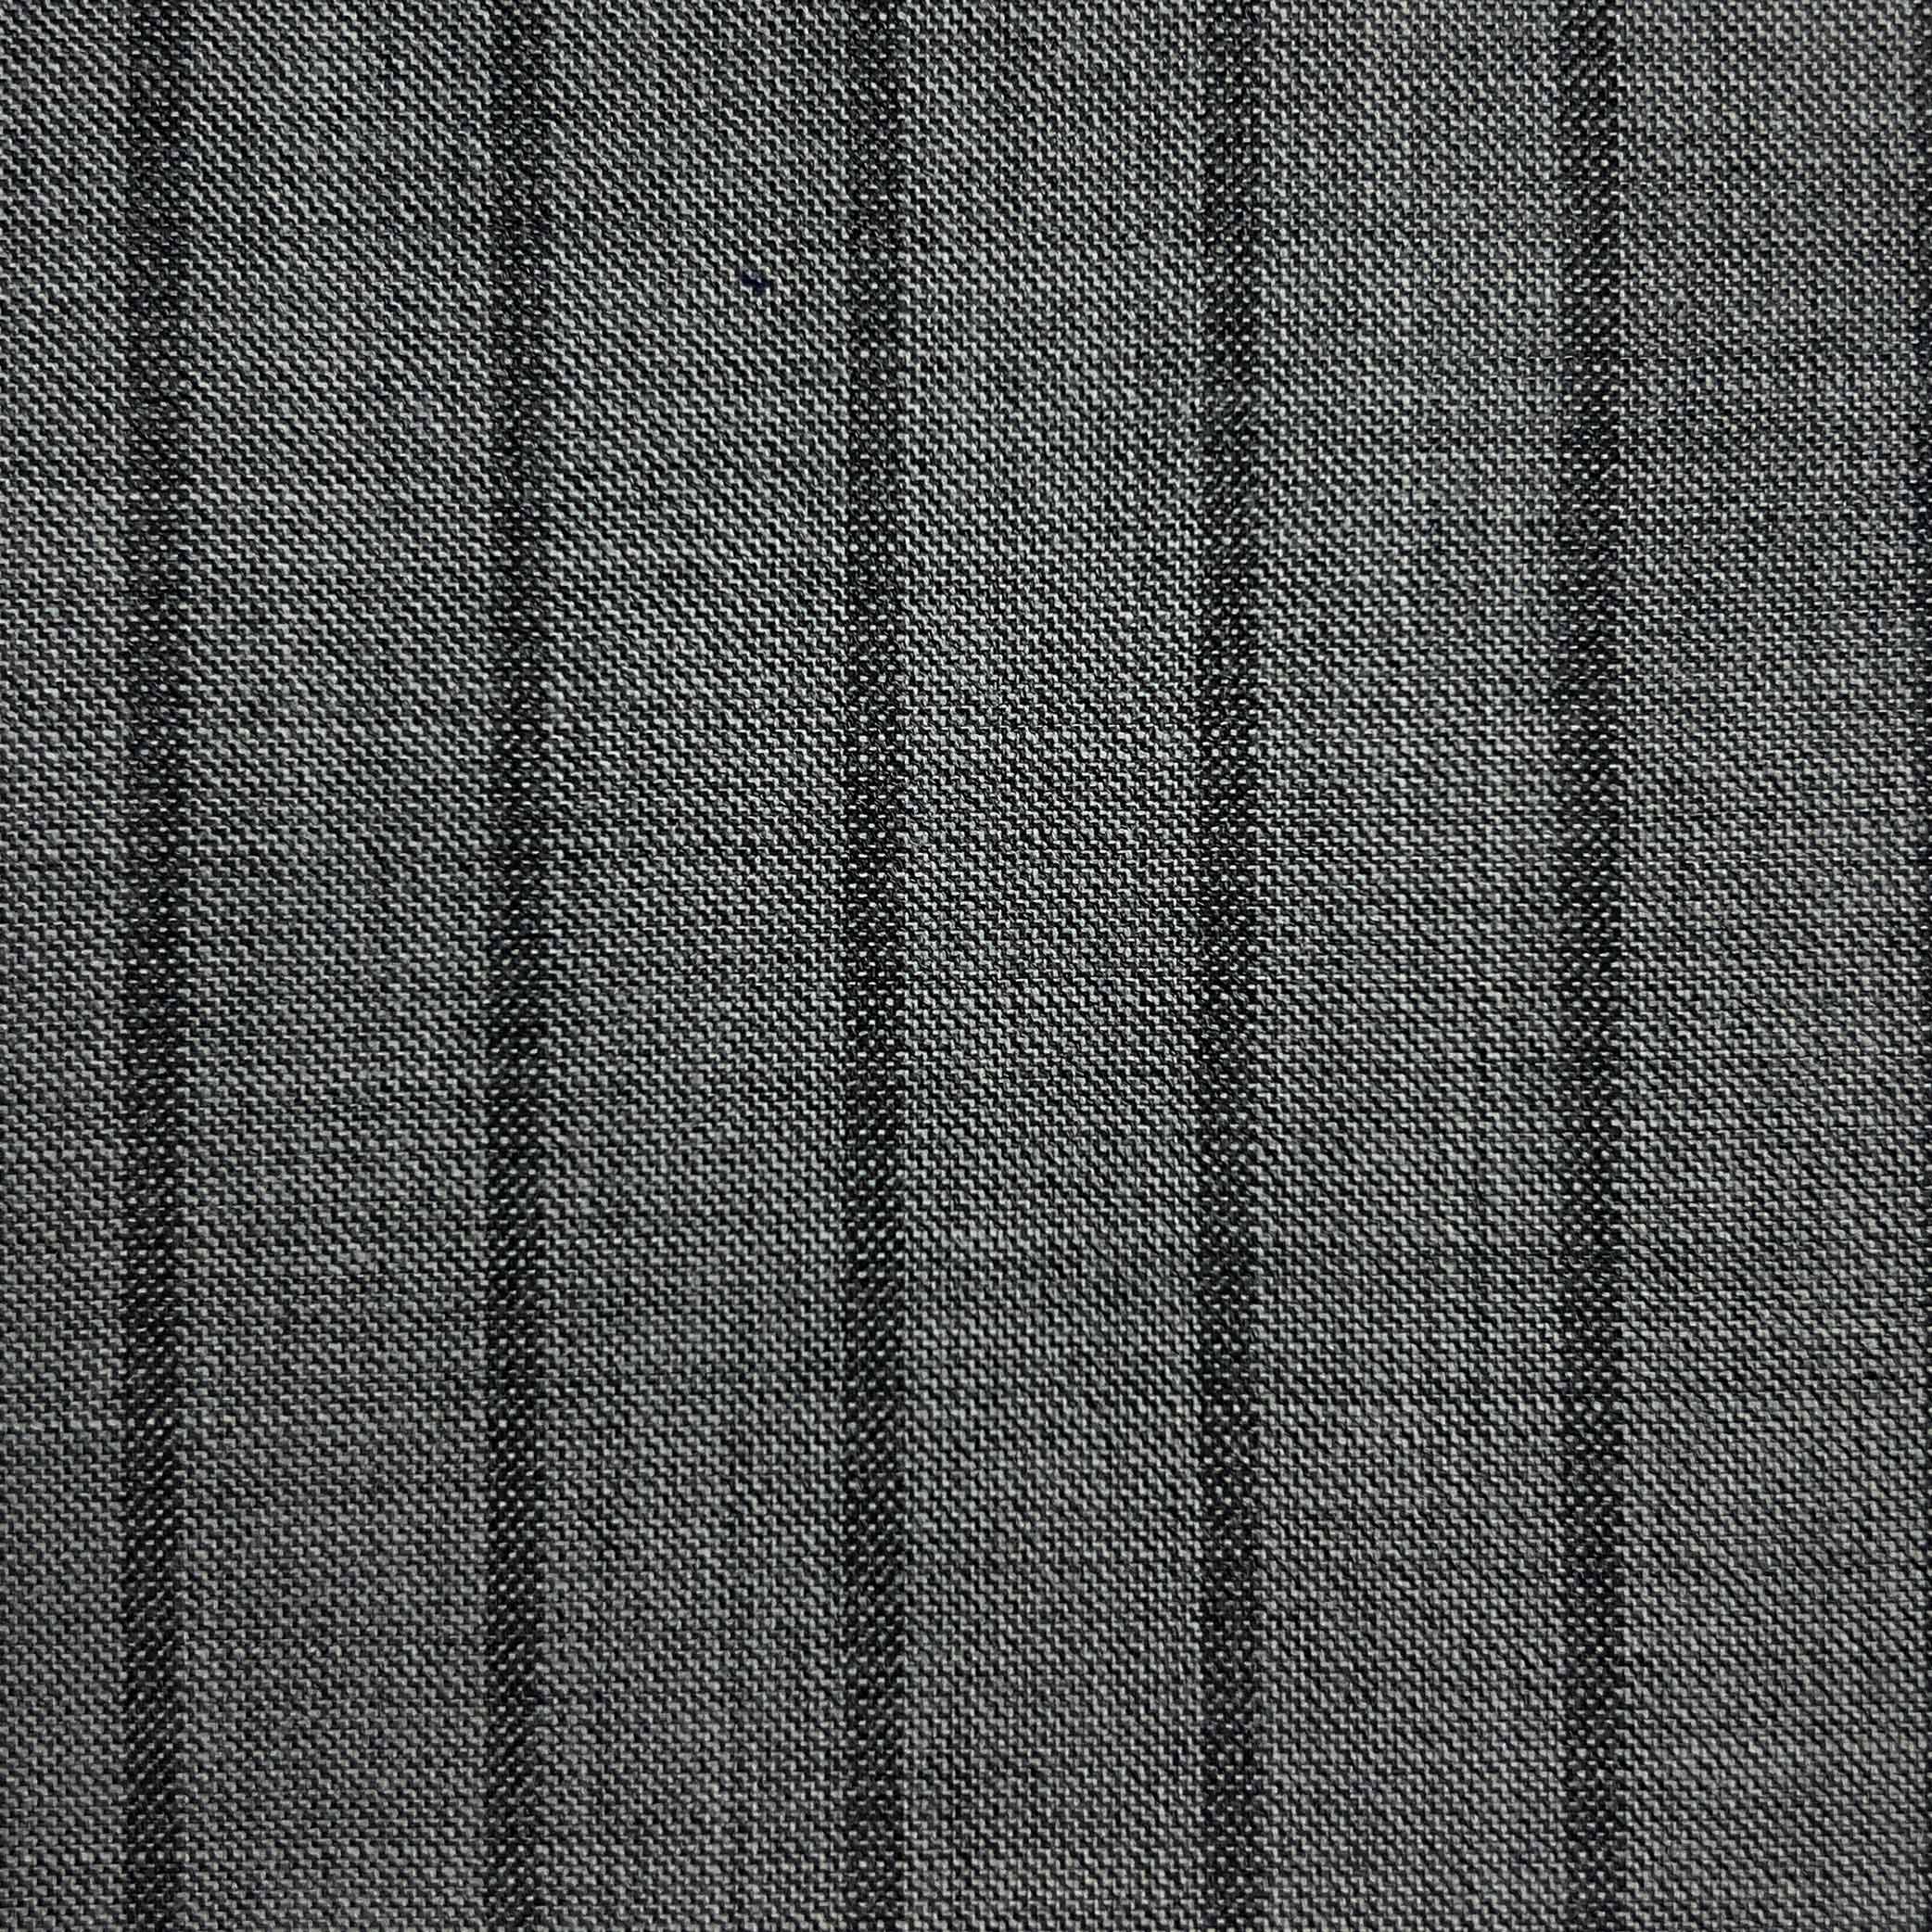 Westwood Hart Online Custom Hand Tailor Suits Sportcoats Trousers Waistcoats Overcoats Silver Grey With 3/4" Wide Bold Self Stripes Design